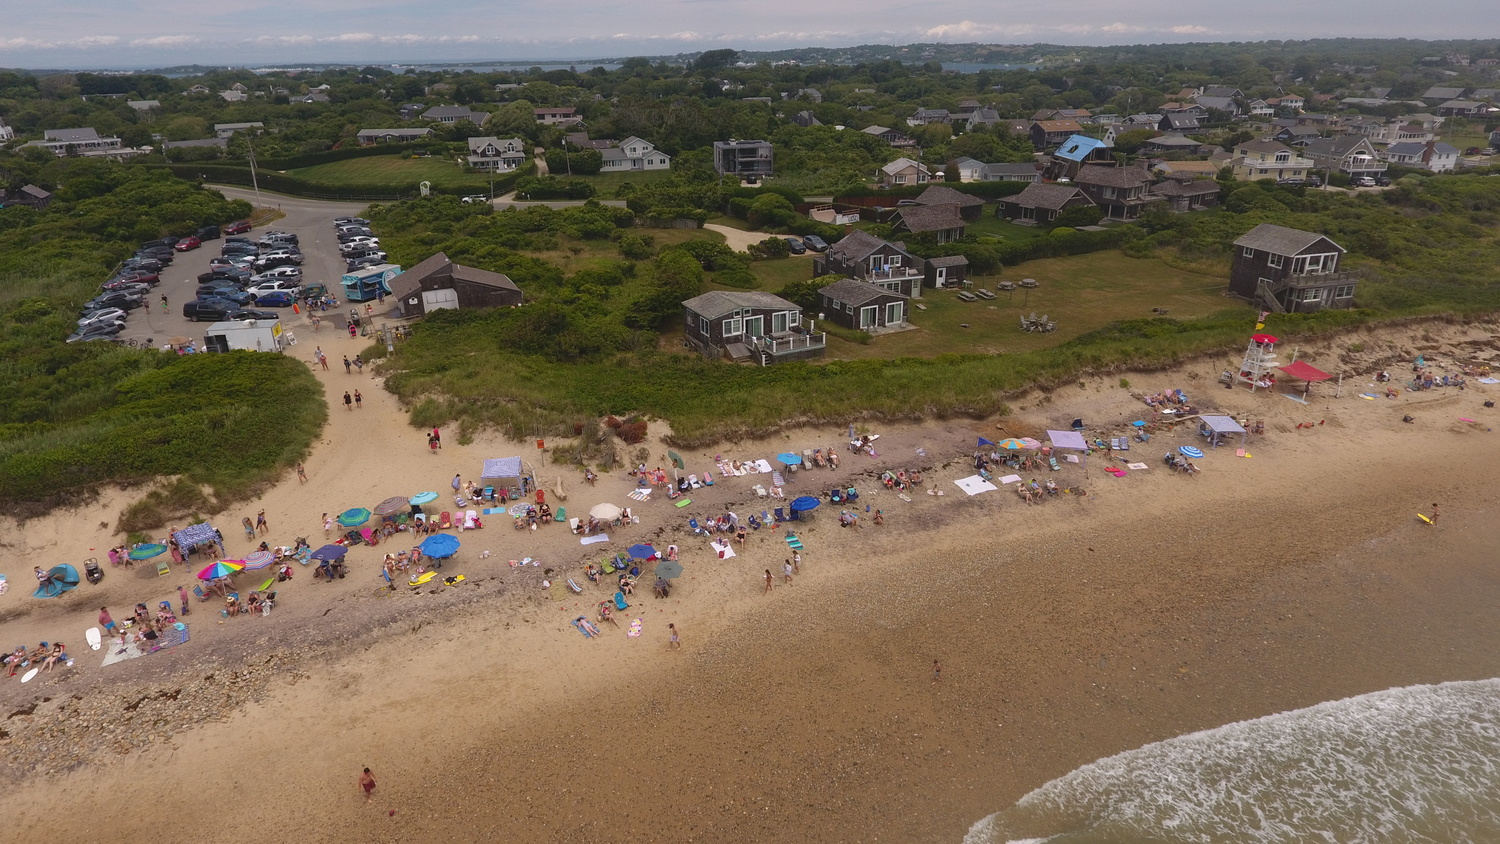 Ditch Plains has suffered from eroding beaches for years, as the dunes have steadily retreated toward a cluster of homes sitting in the low area between two town parking lots. MICHAEL WRIGHT